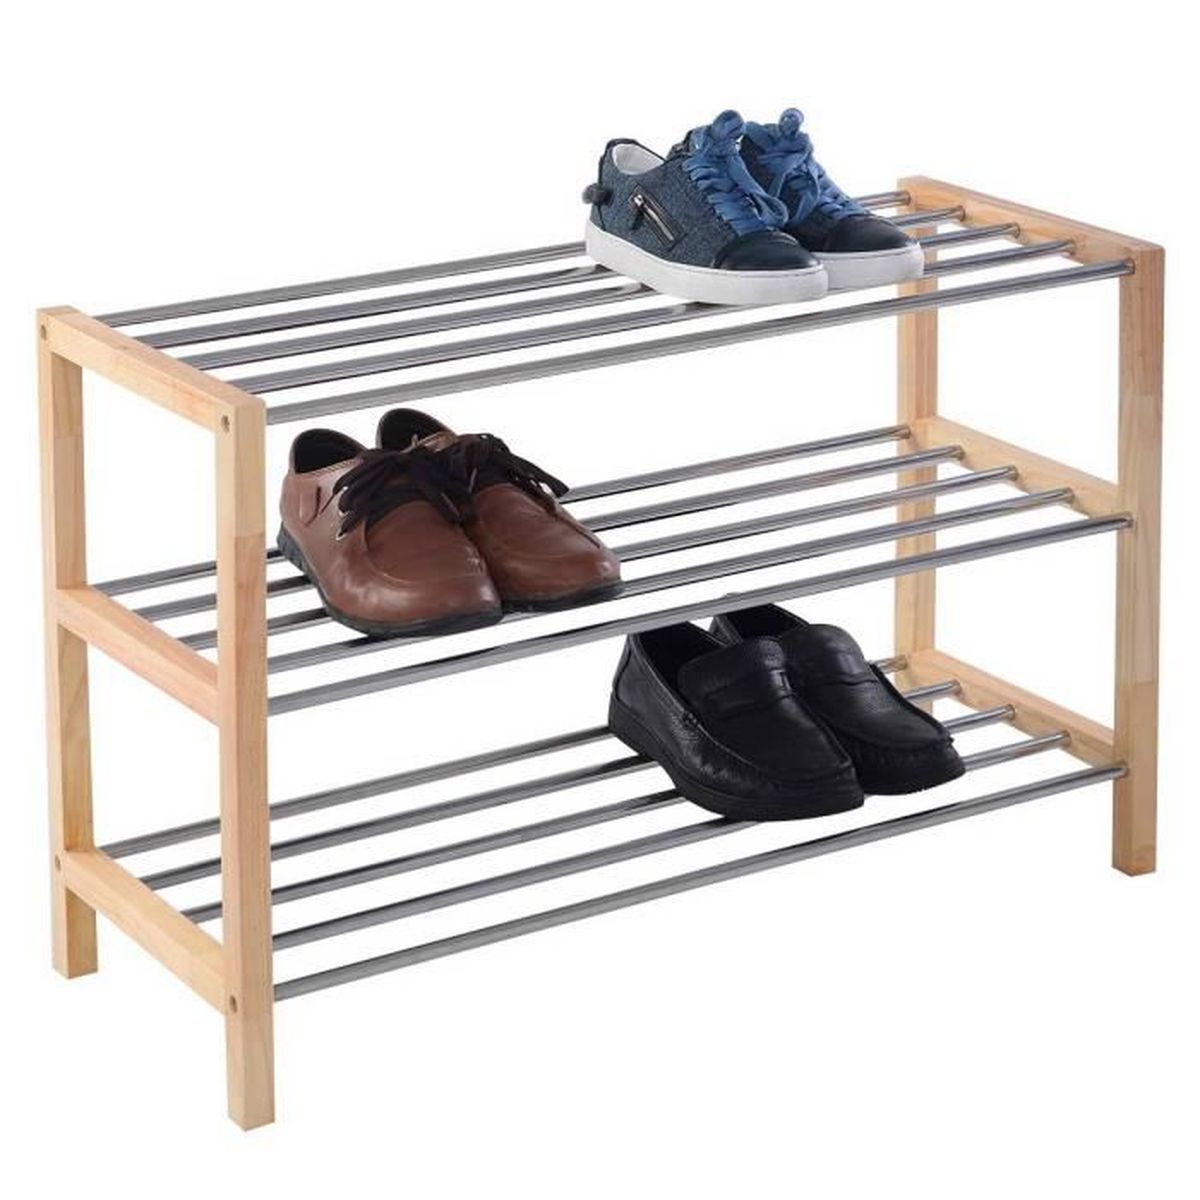 meuble chaussure 3 etagere